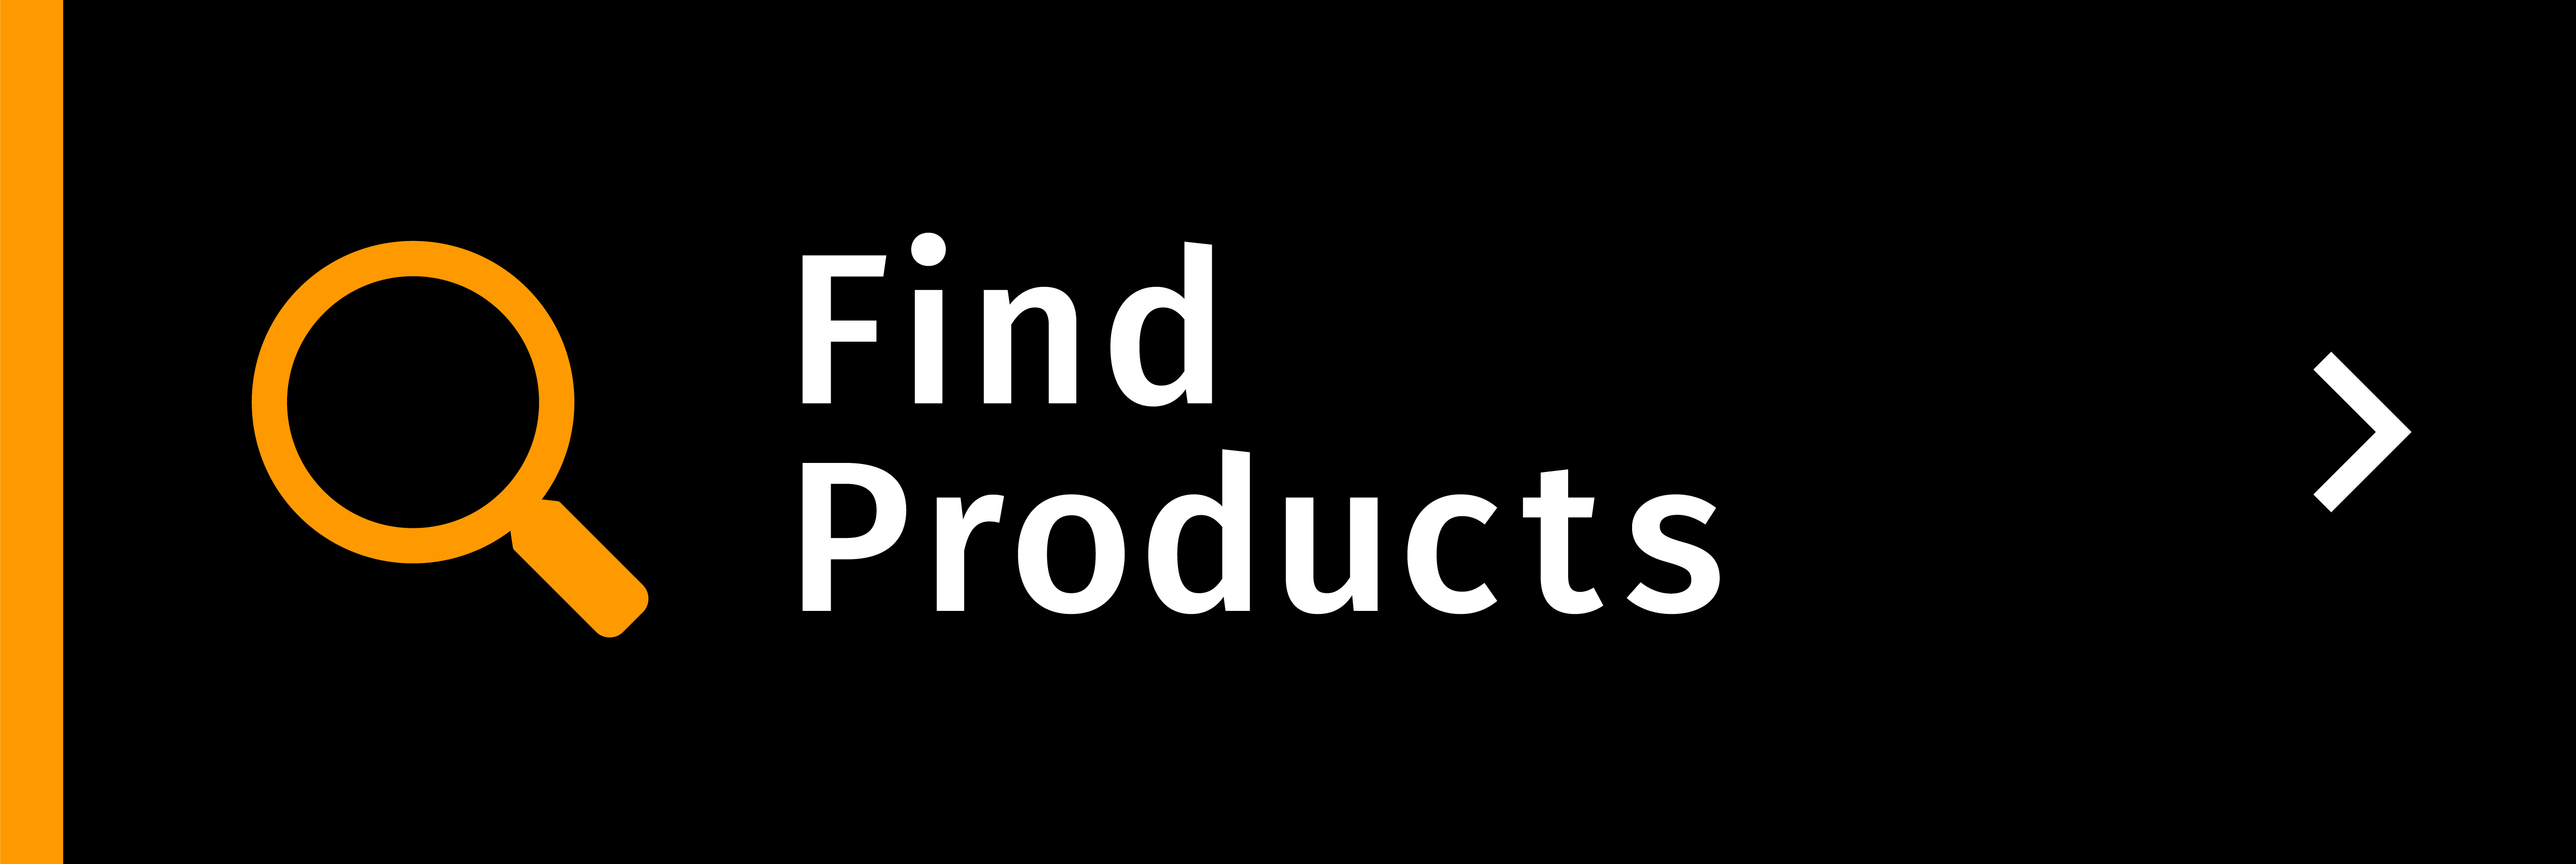 Find Products